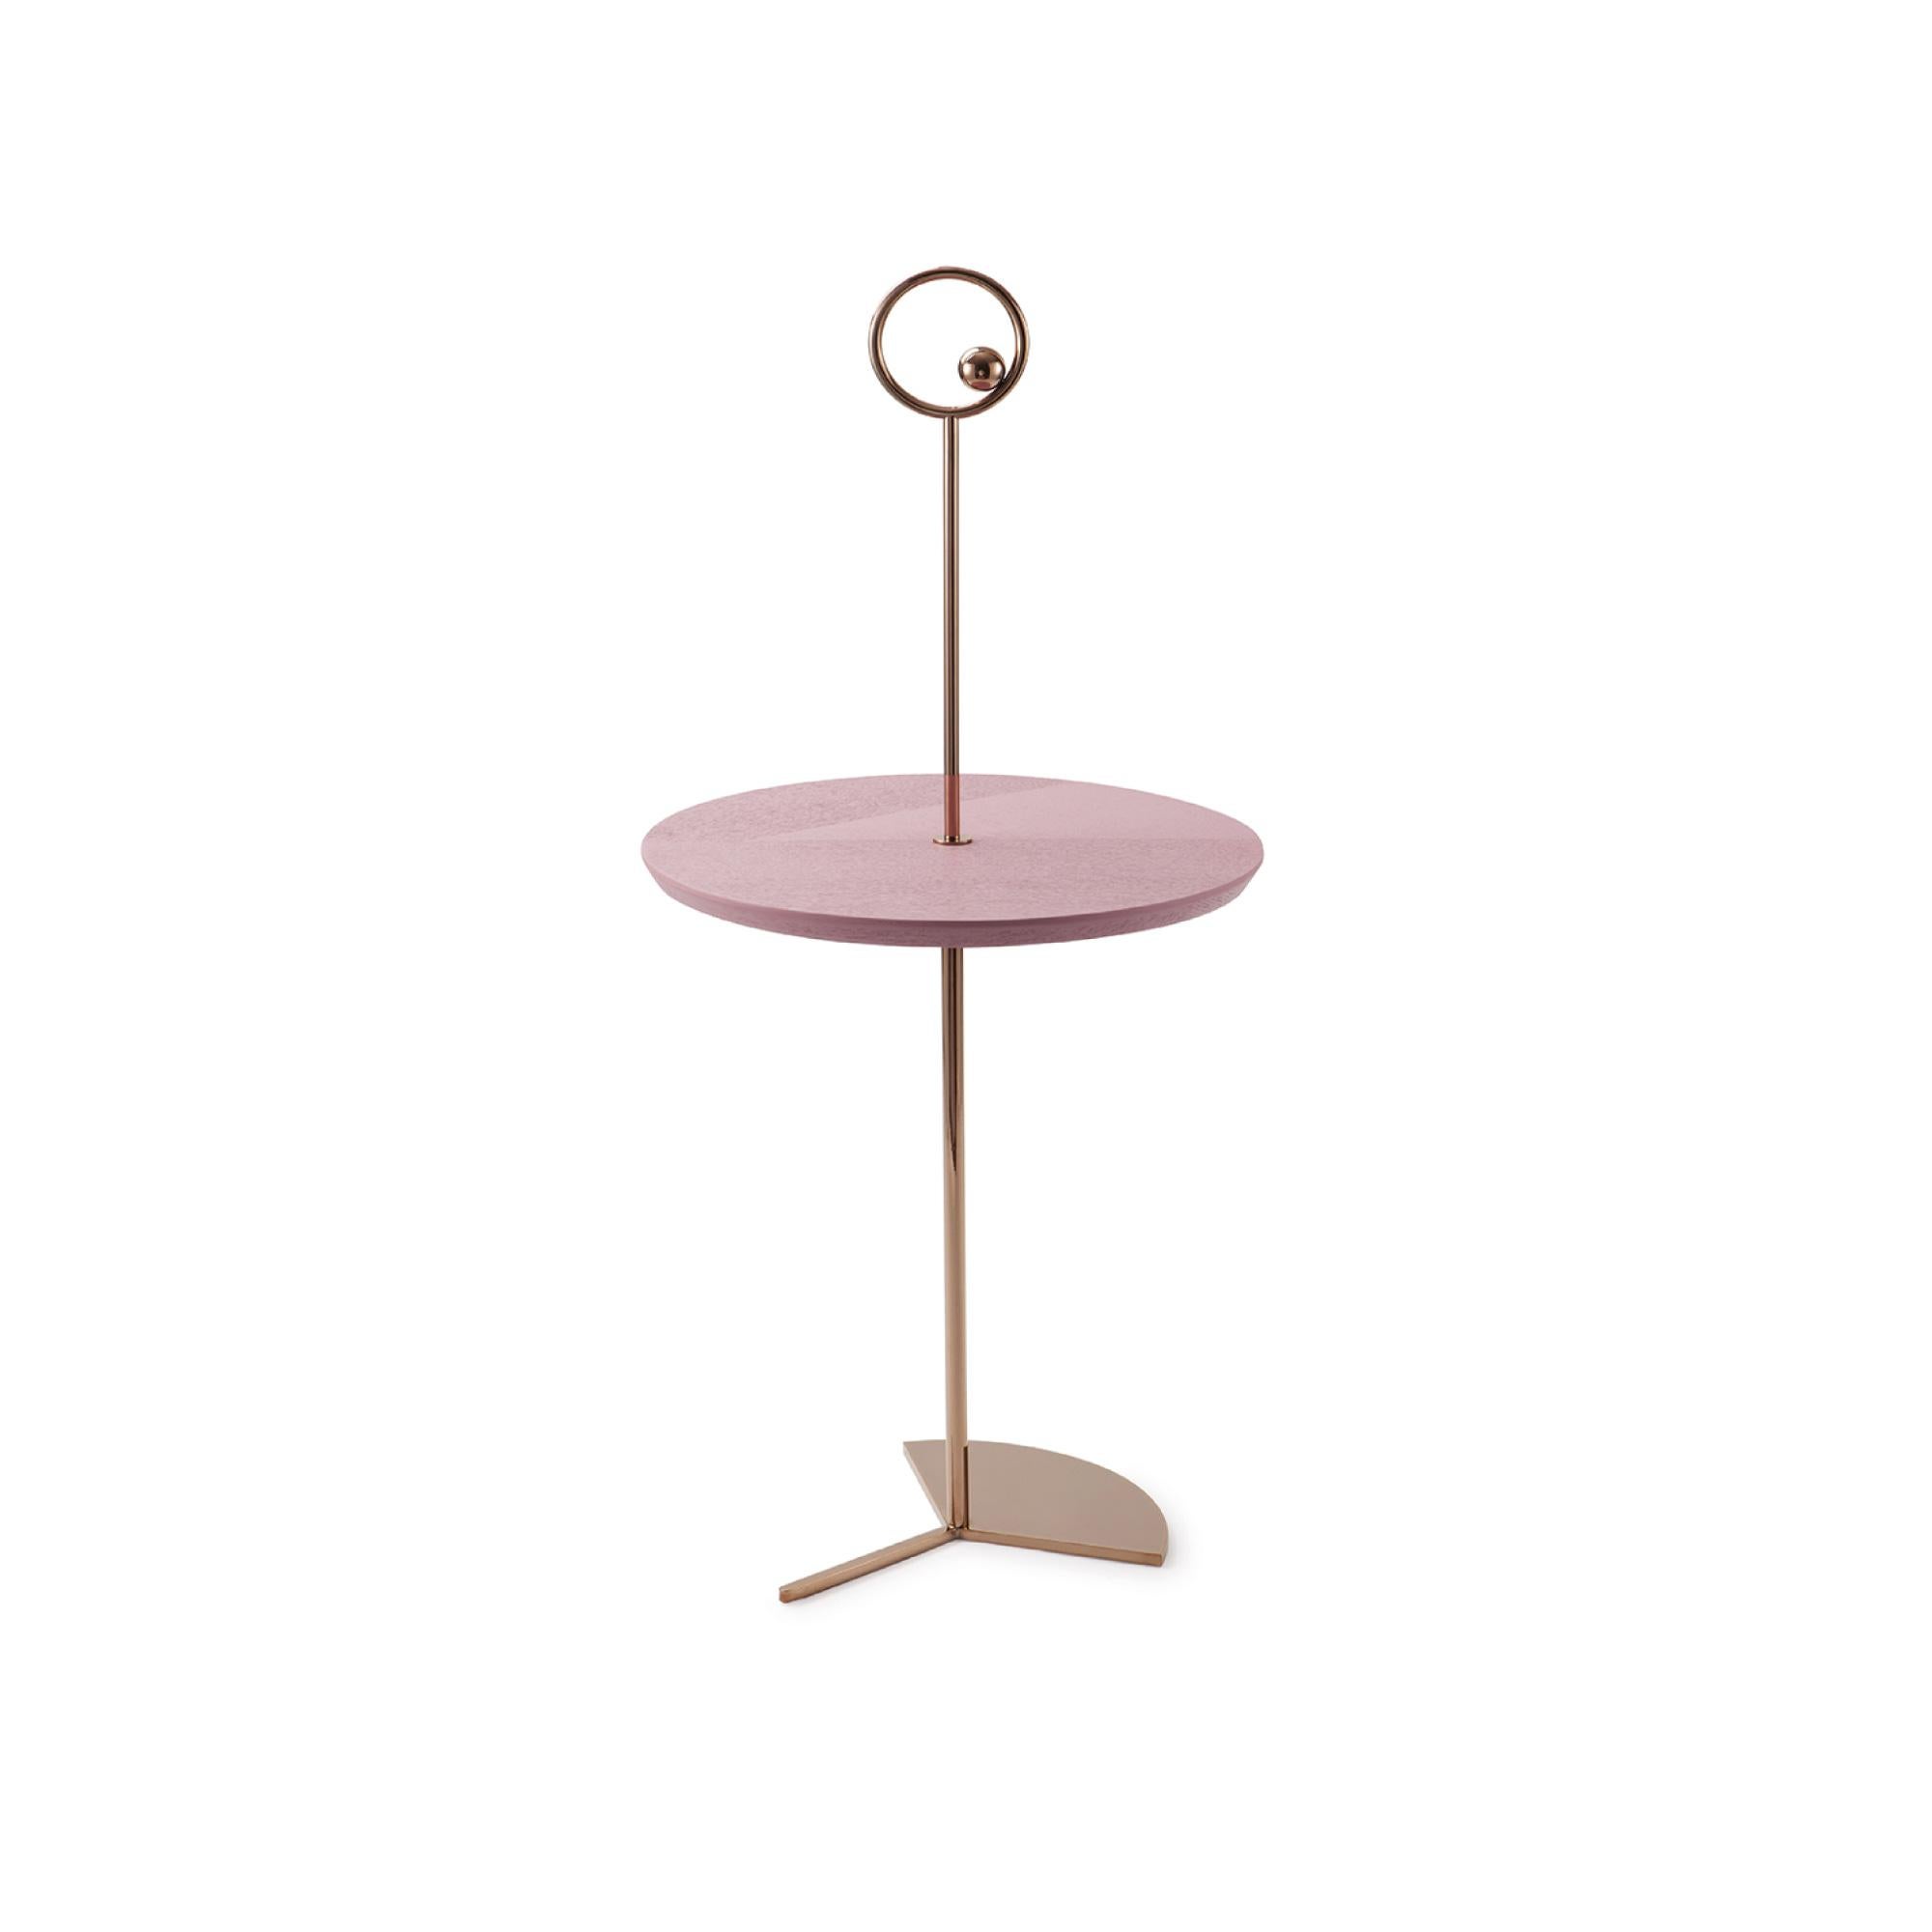 Off The Moon N°1 side table by Thomas Dariel
Dimensions: diameter 40 x height 89.5 cm 
Materials: Tray in colored ash veneer painted in matte dusty pink base and handle in plated metal coated with glossy pink copper finish.
Available in colors: